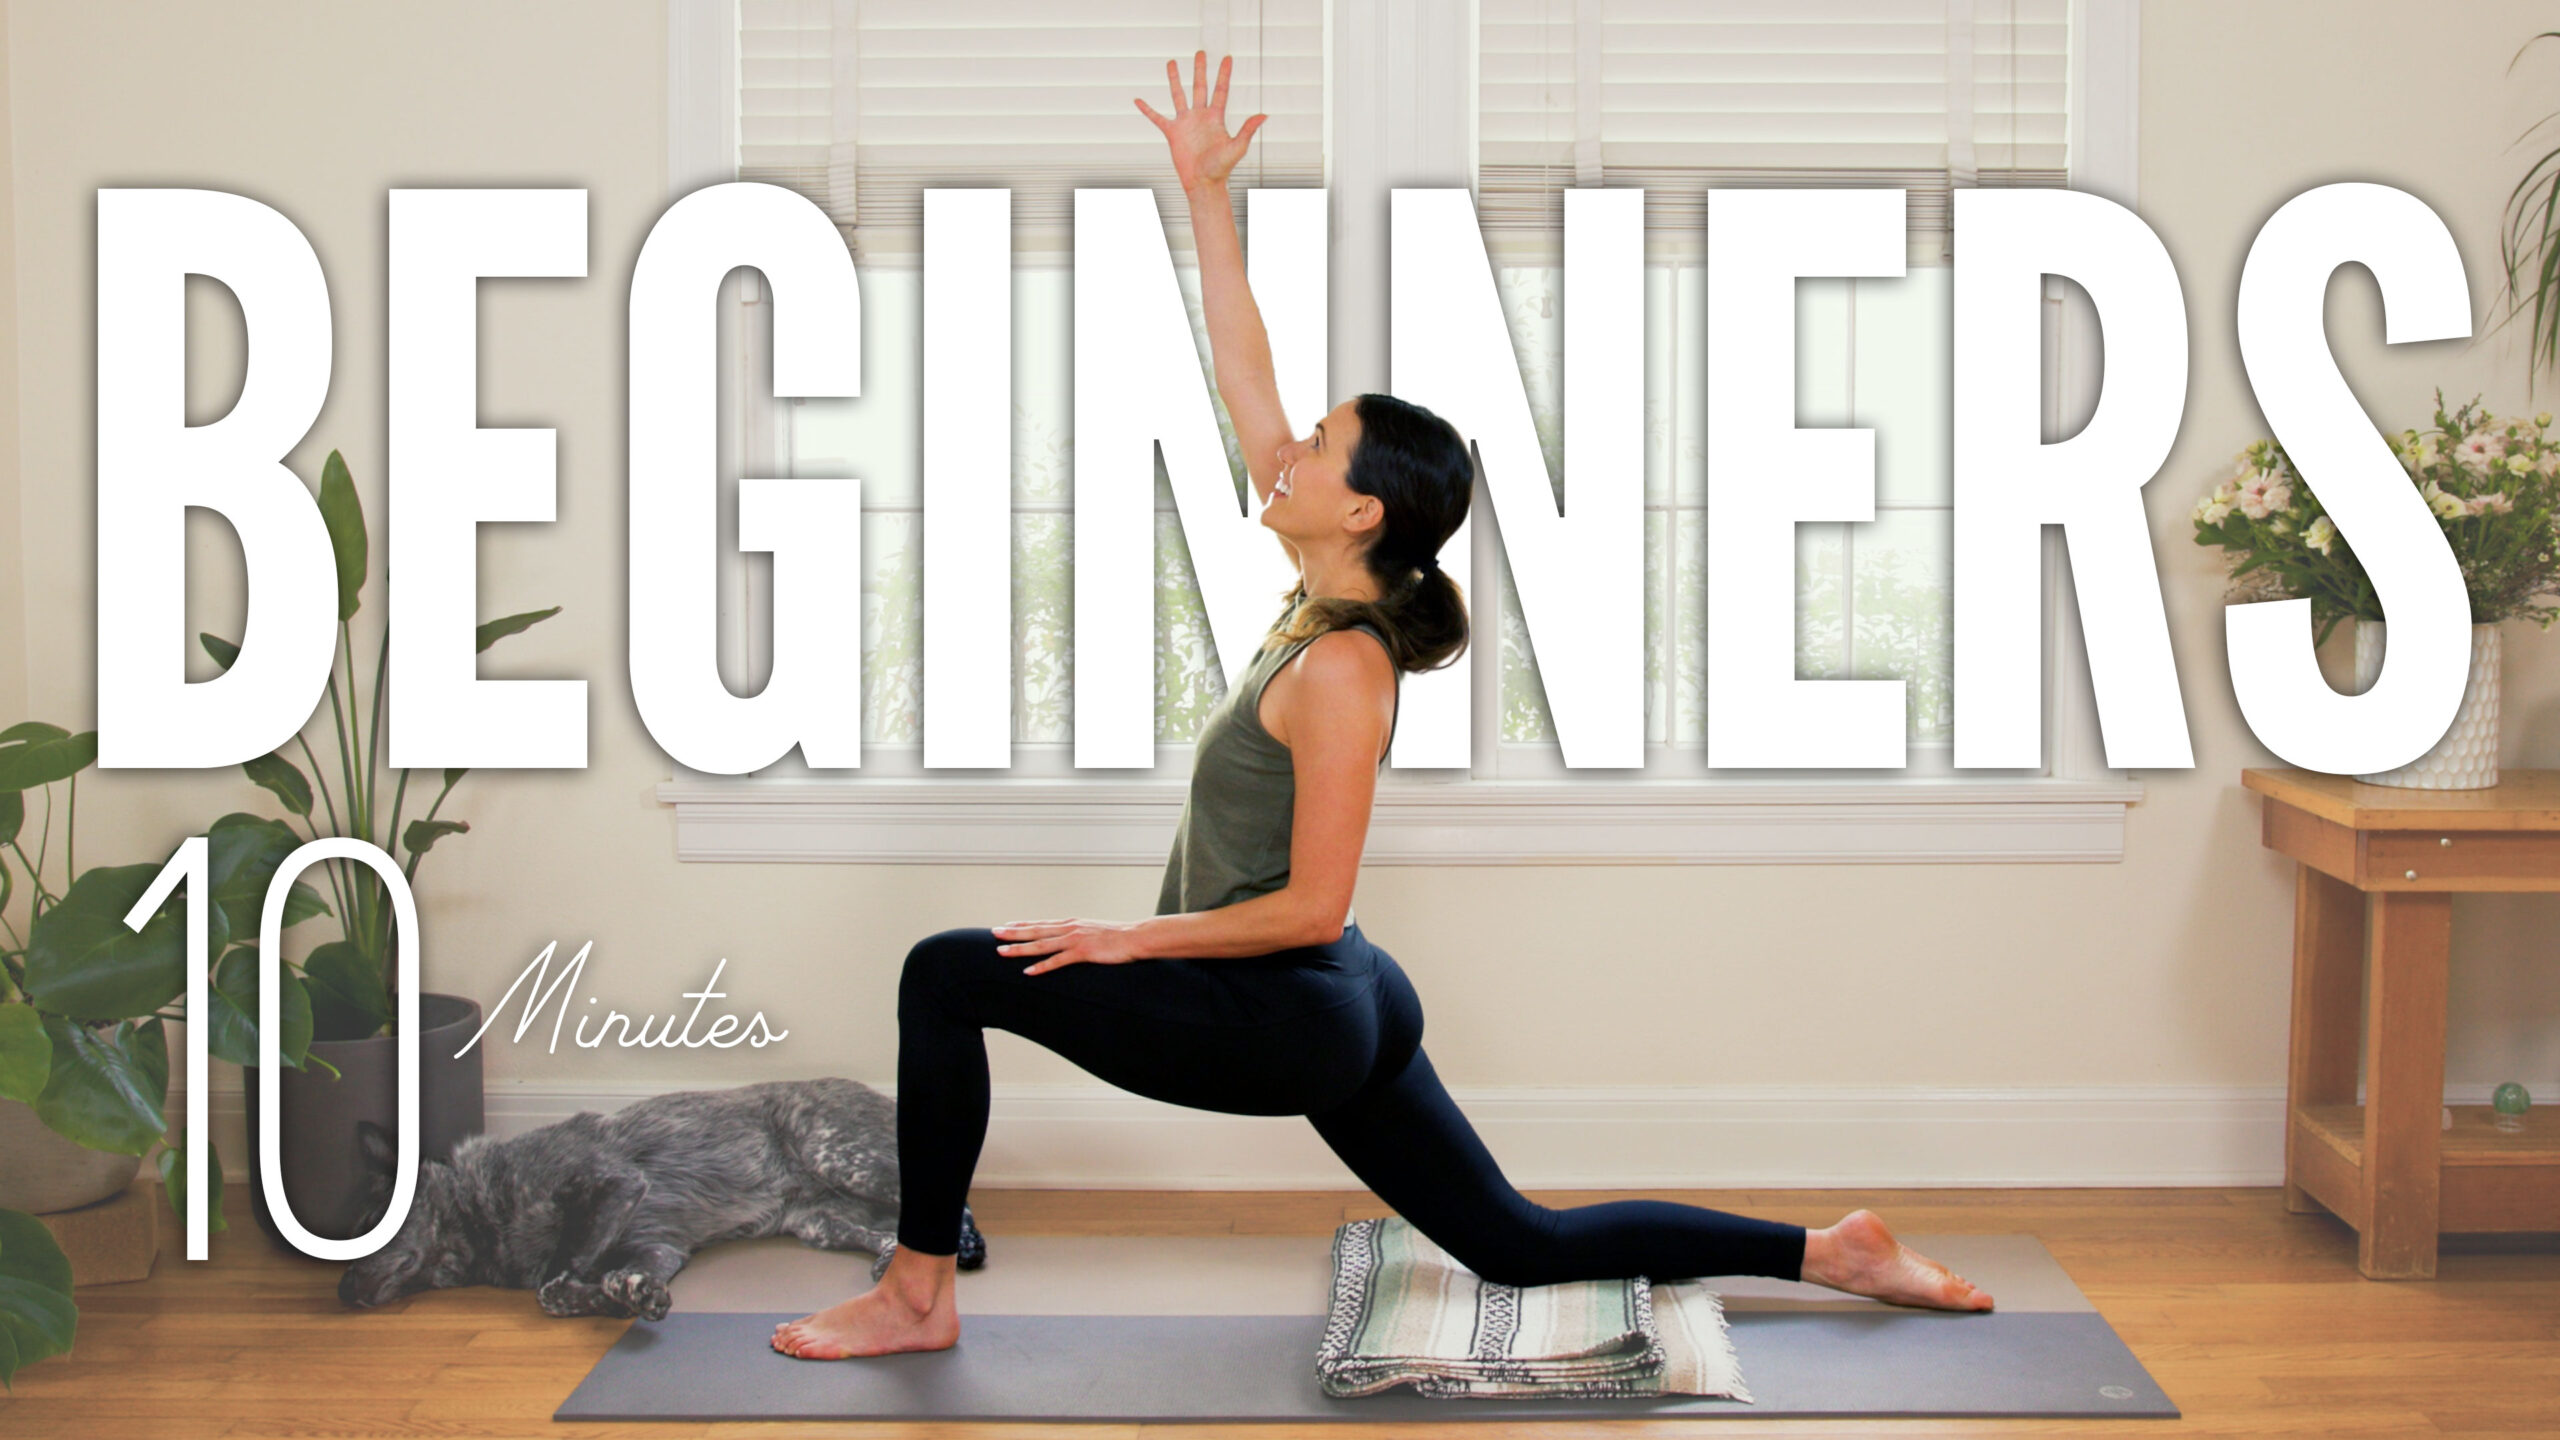 Yoga For Complete Beginners 2 - Relaxation & Flexibility Stretches 10  Minute Yoga Workout 